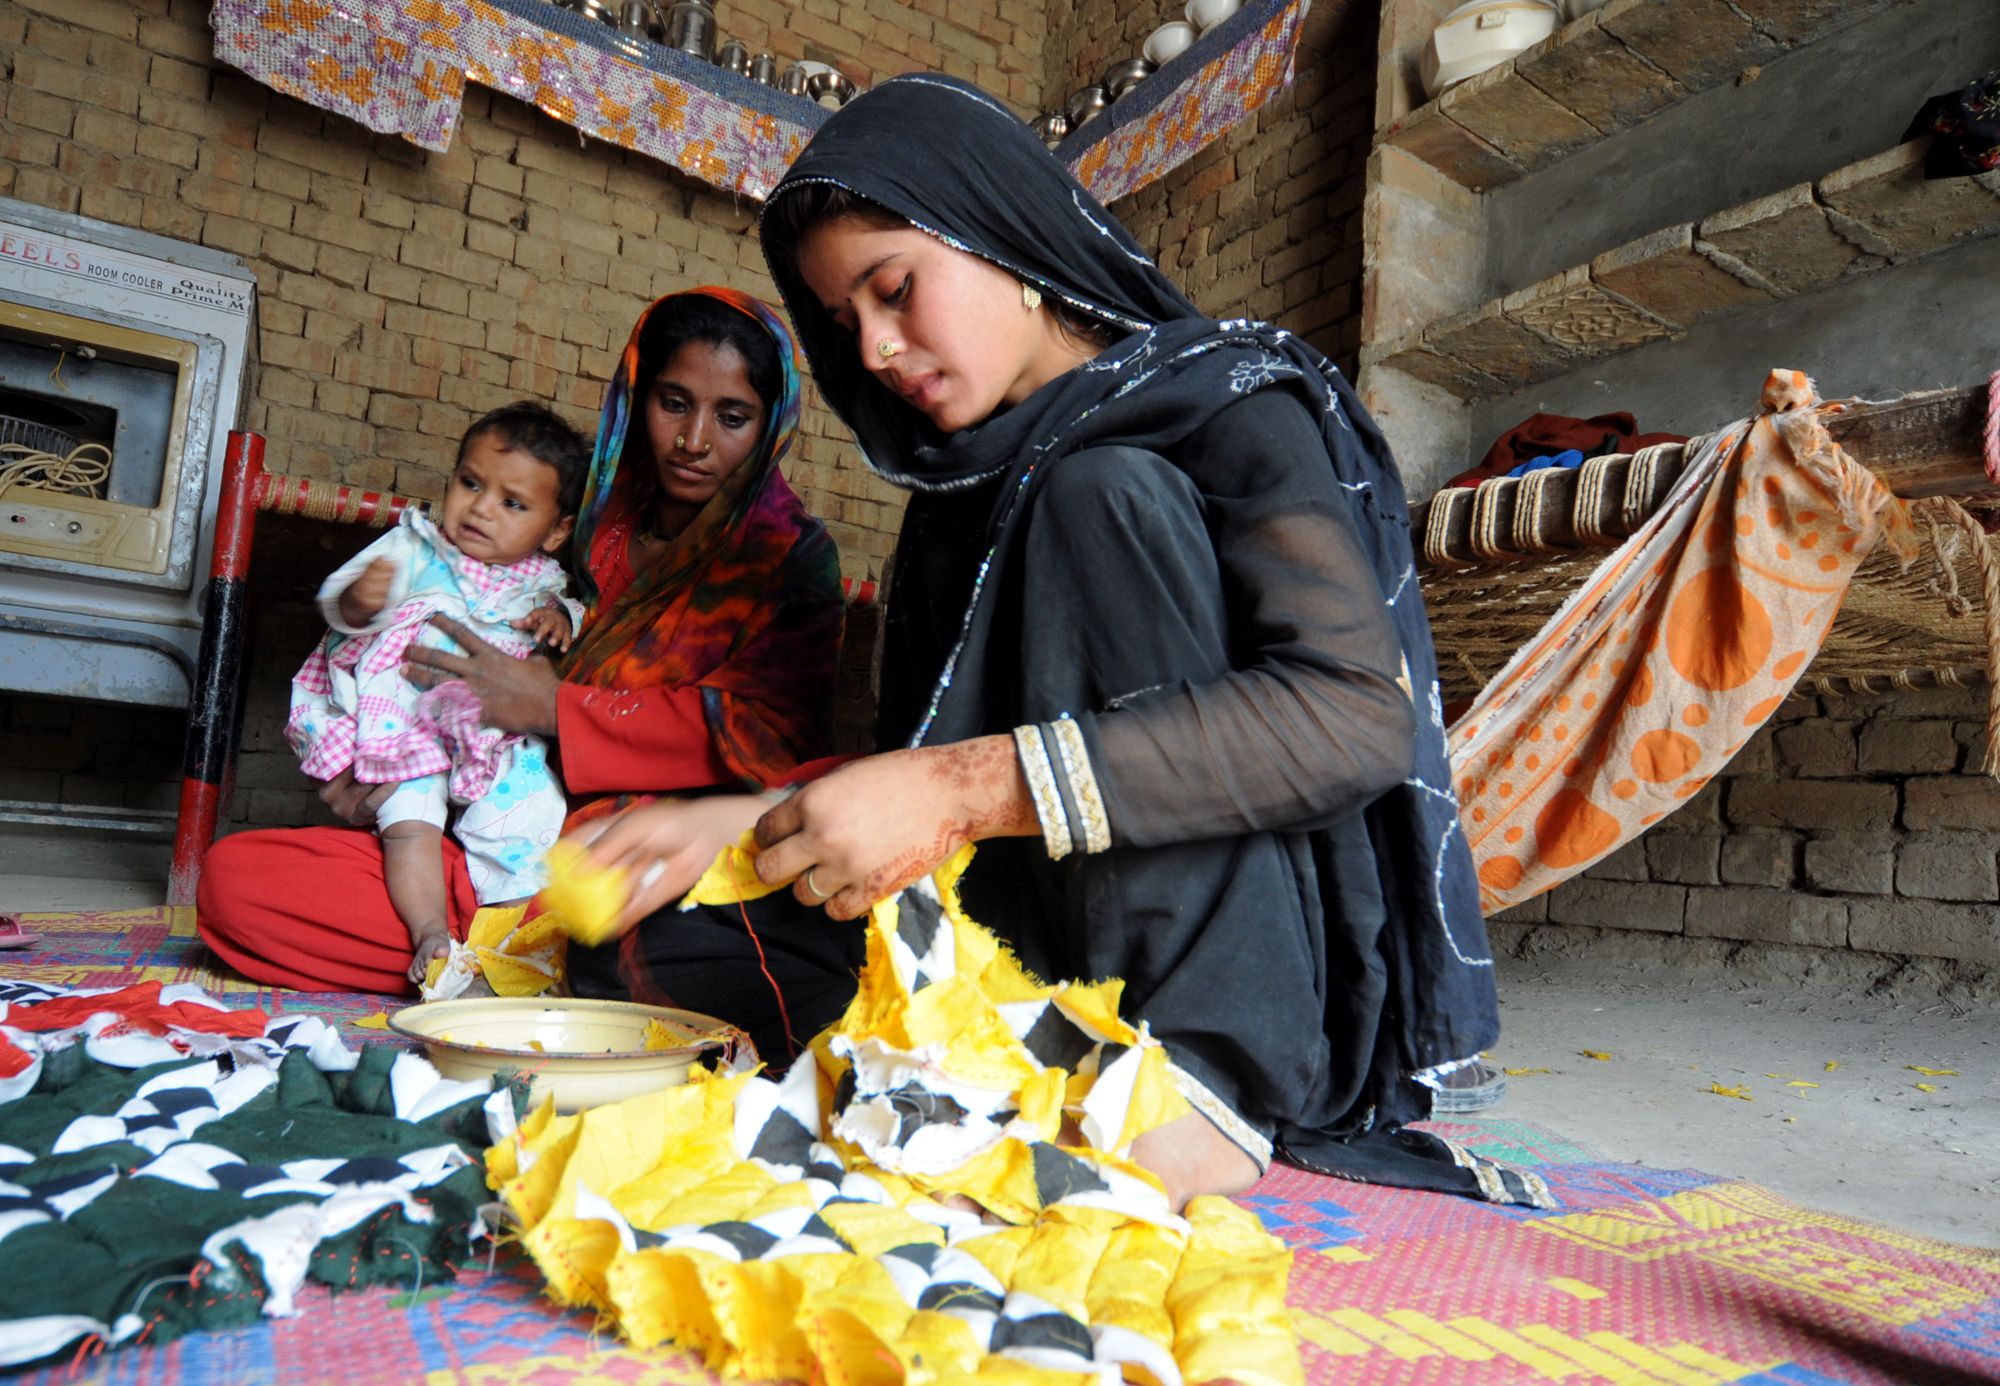 TAUNSA:PAKISTAN: Uzma Mai, elder daughter of Fida Hussain (not in the picture), stitching a RILLI or a bed cover made of small but colur-full pieces of clath as her mother Haseena Bibi with Rabia Mai (youngest daughter of Hussain) watches at Basti Sheikhan-wali near Taunsa Barrage at River Indus in Muzaffargarh District of Pakistan’s Punjab province. They are among the beneficiaries of the dam as the family have the fishing contract with authorities. The Taunsa Barrage was completed in 1958, and it has been identified as the barrage with the highest priority for rehabilitation. It requires urgent measures to avoid severe economic and social impacts on the lives of millions of poor farmers through interruption of irrigation on two million acres (8,000 km²) and drinking water in the rural areas of southern Punjab, benefiting several million farmers. Photo: Visual News Associates / World Bank